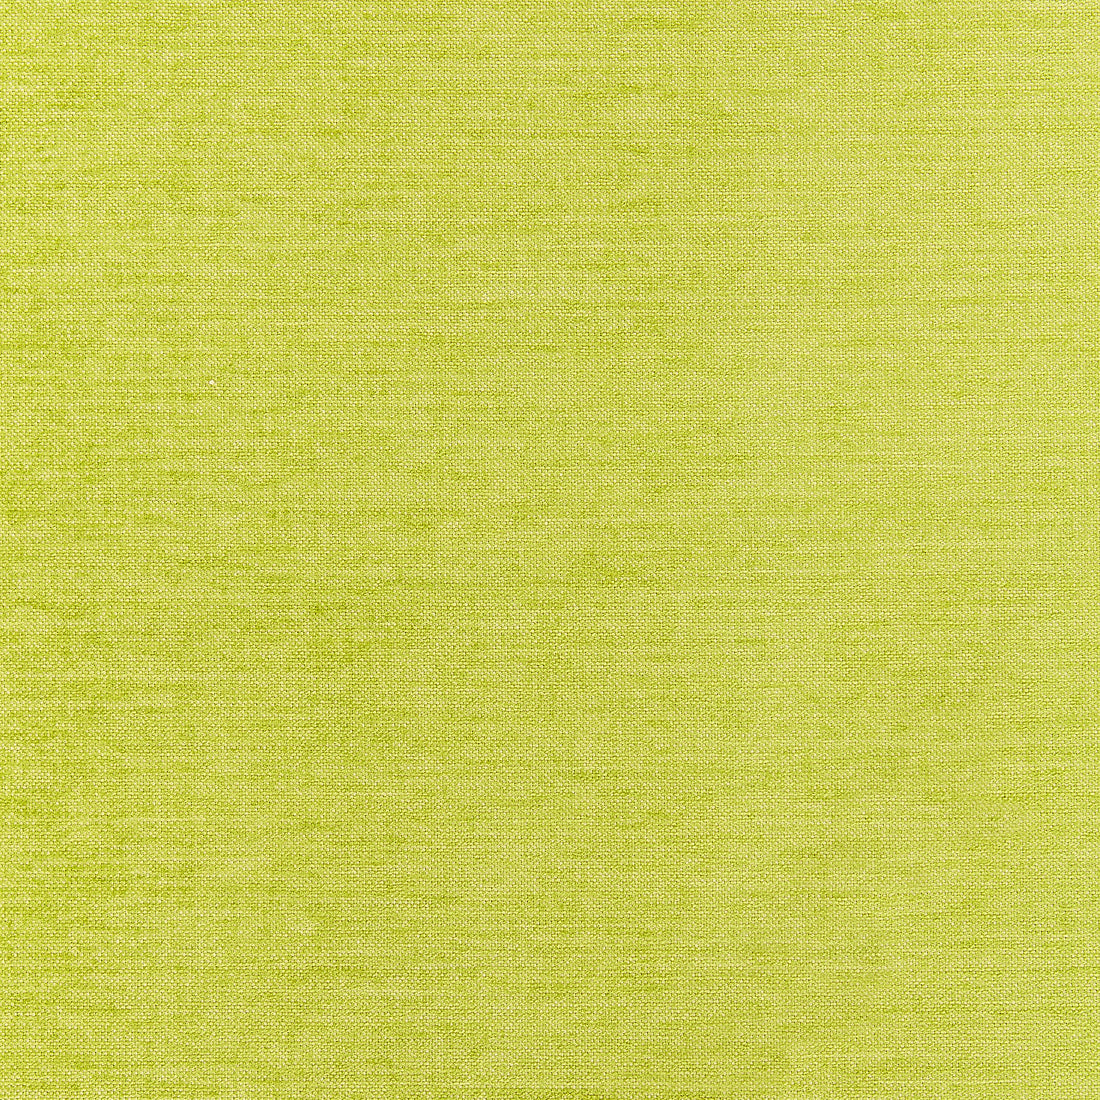 Aura fabric in spring green color - pattern number W80277 - by Thibaut in the Kaleidoscope Fabrics collection